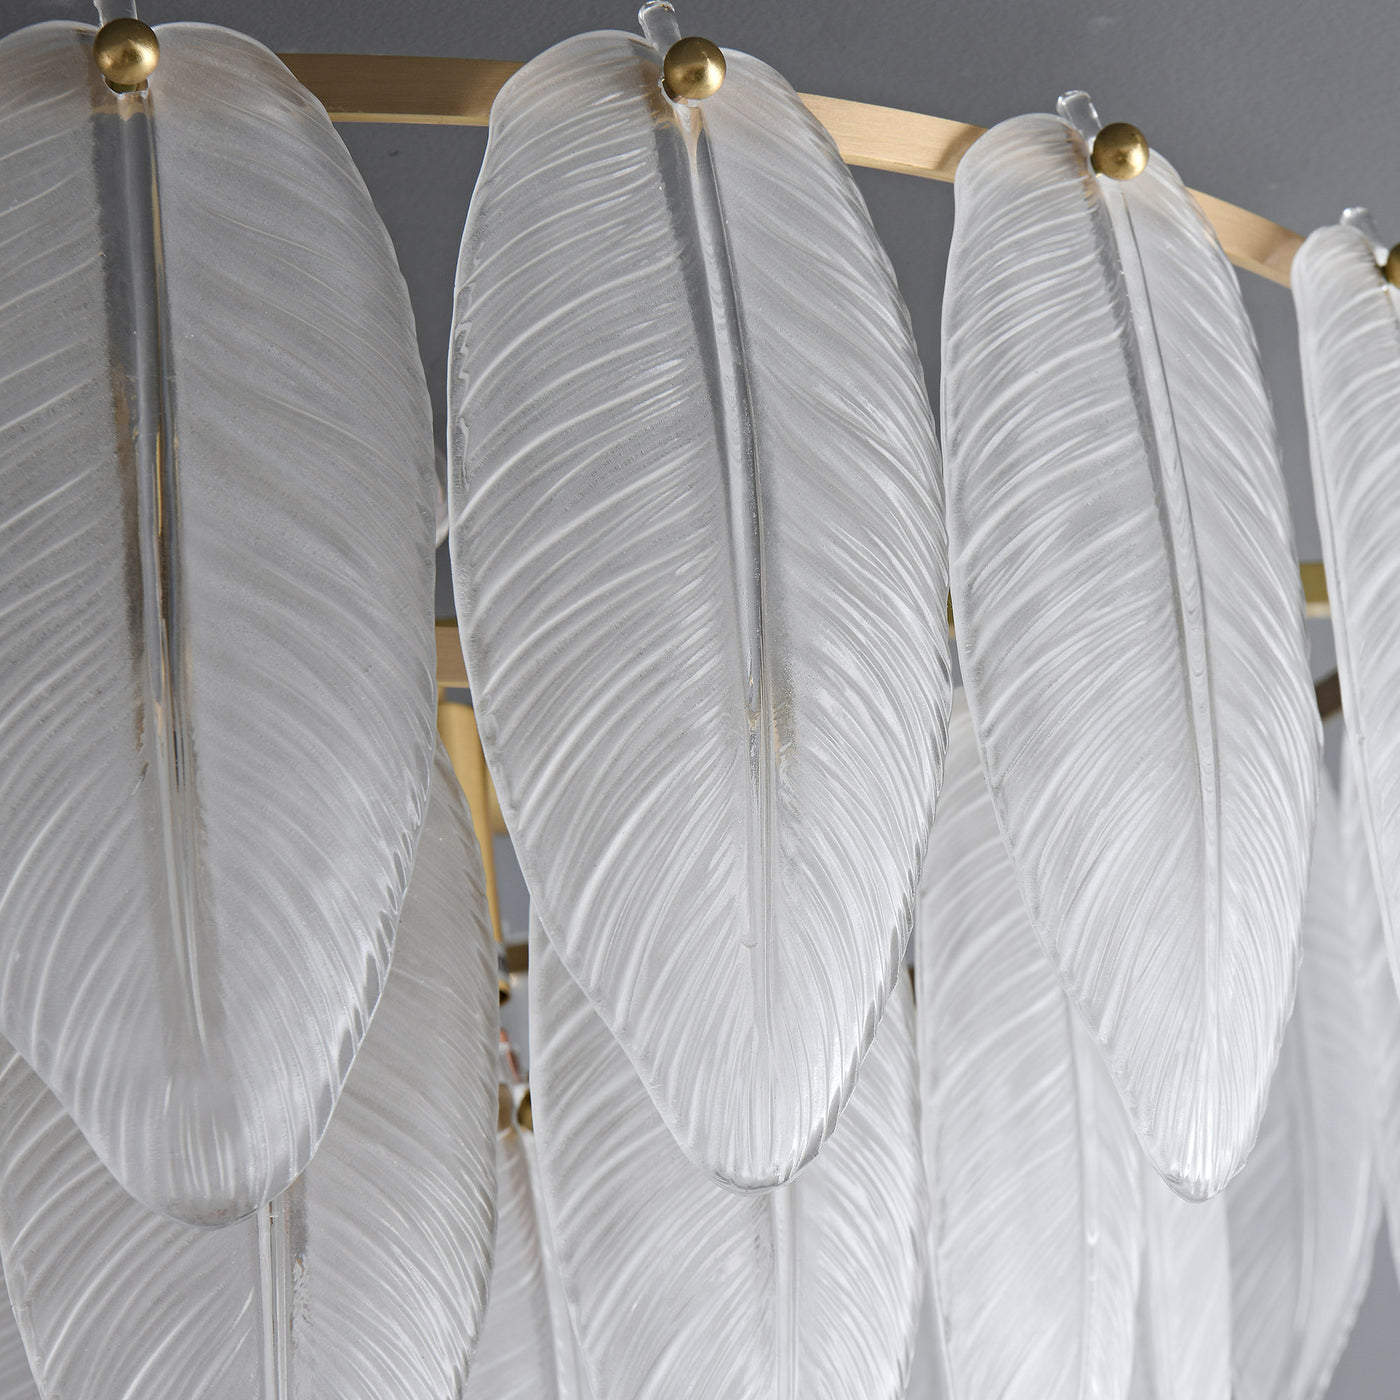 White Feather Postmodern luxury and full copper chandelier